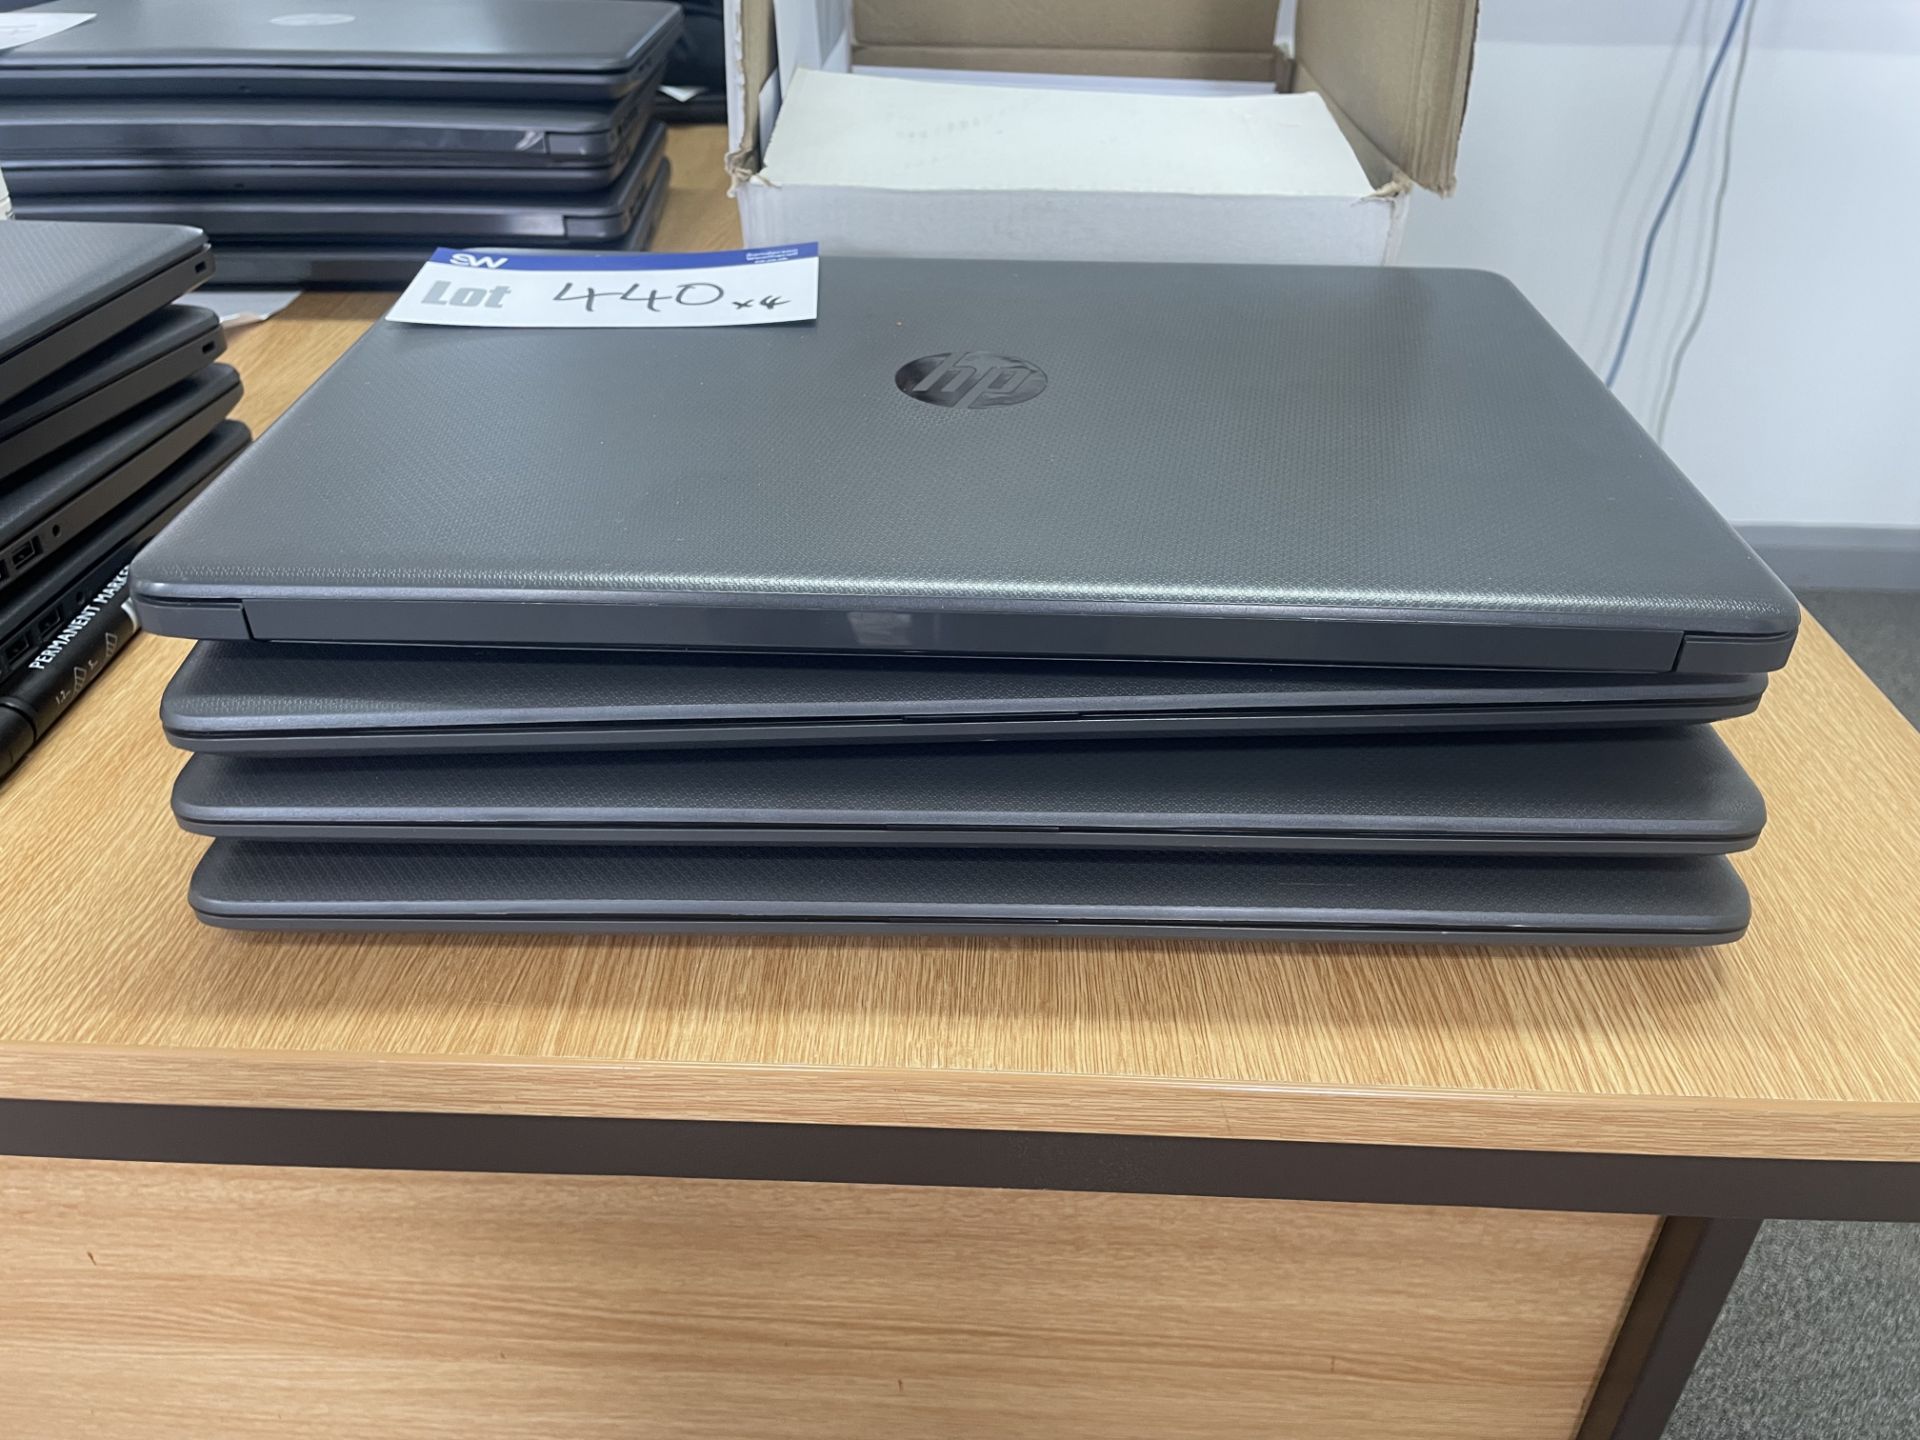 Four HP AMD Aflon Silver 3050U Laptops, with charg - Image 2 of 3